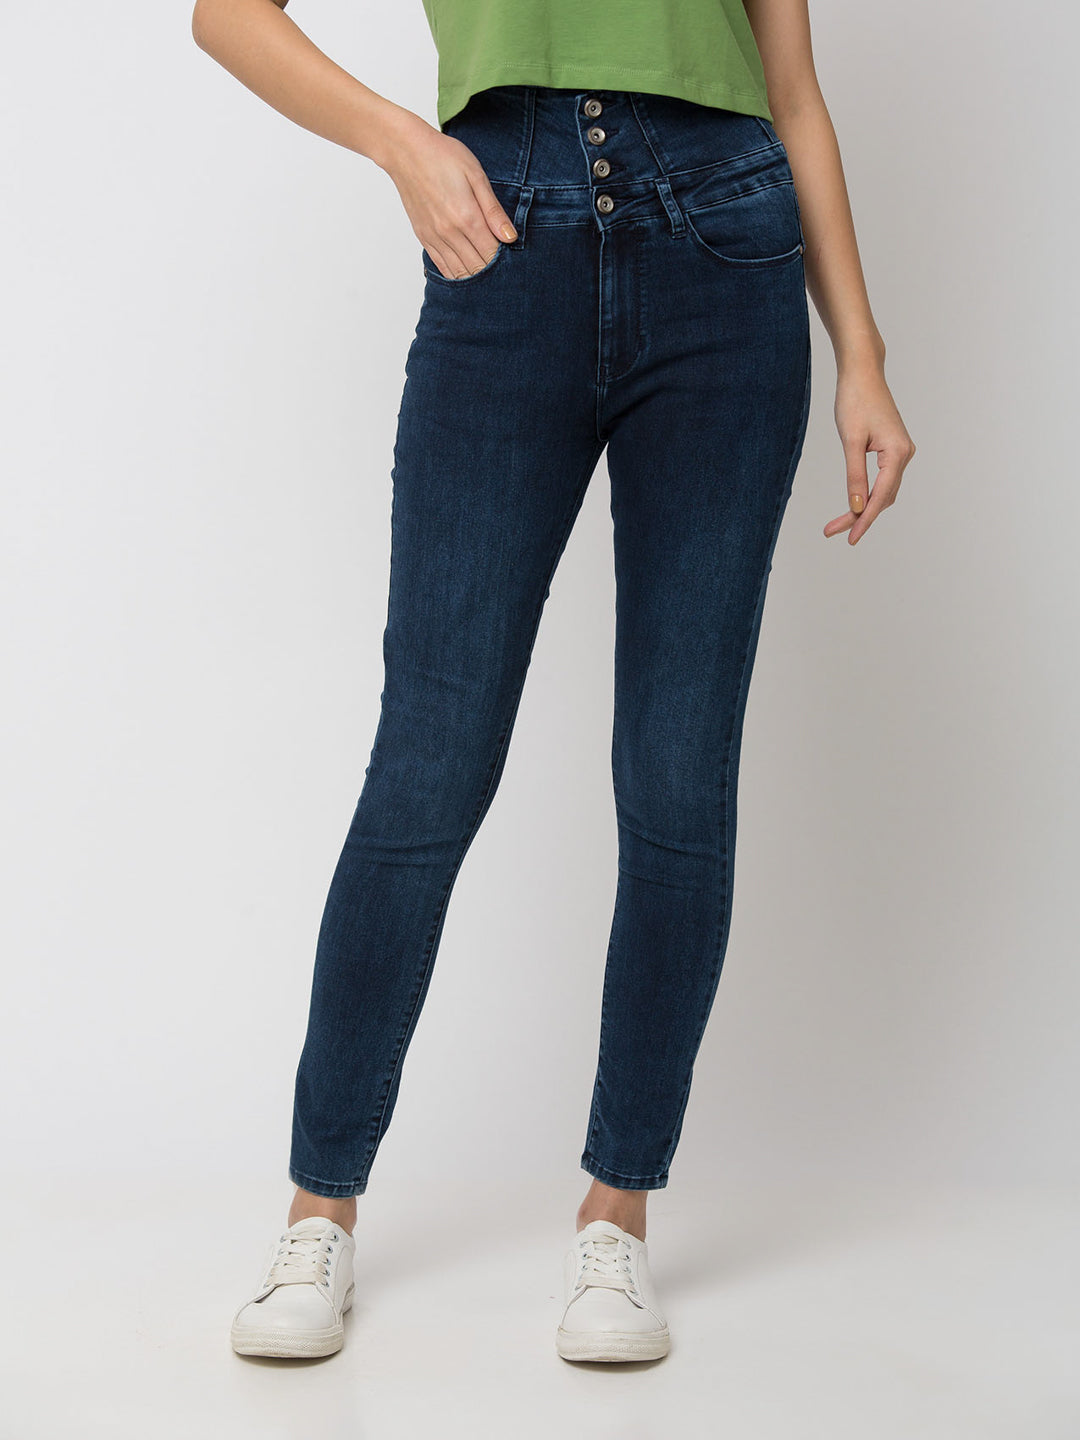 Your Perfect Jeans, Explore shapes to